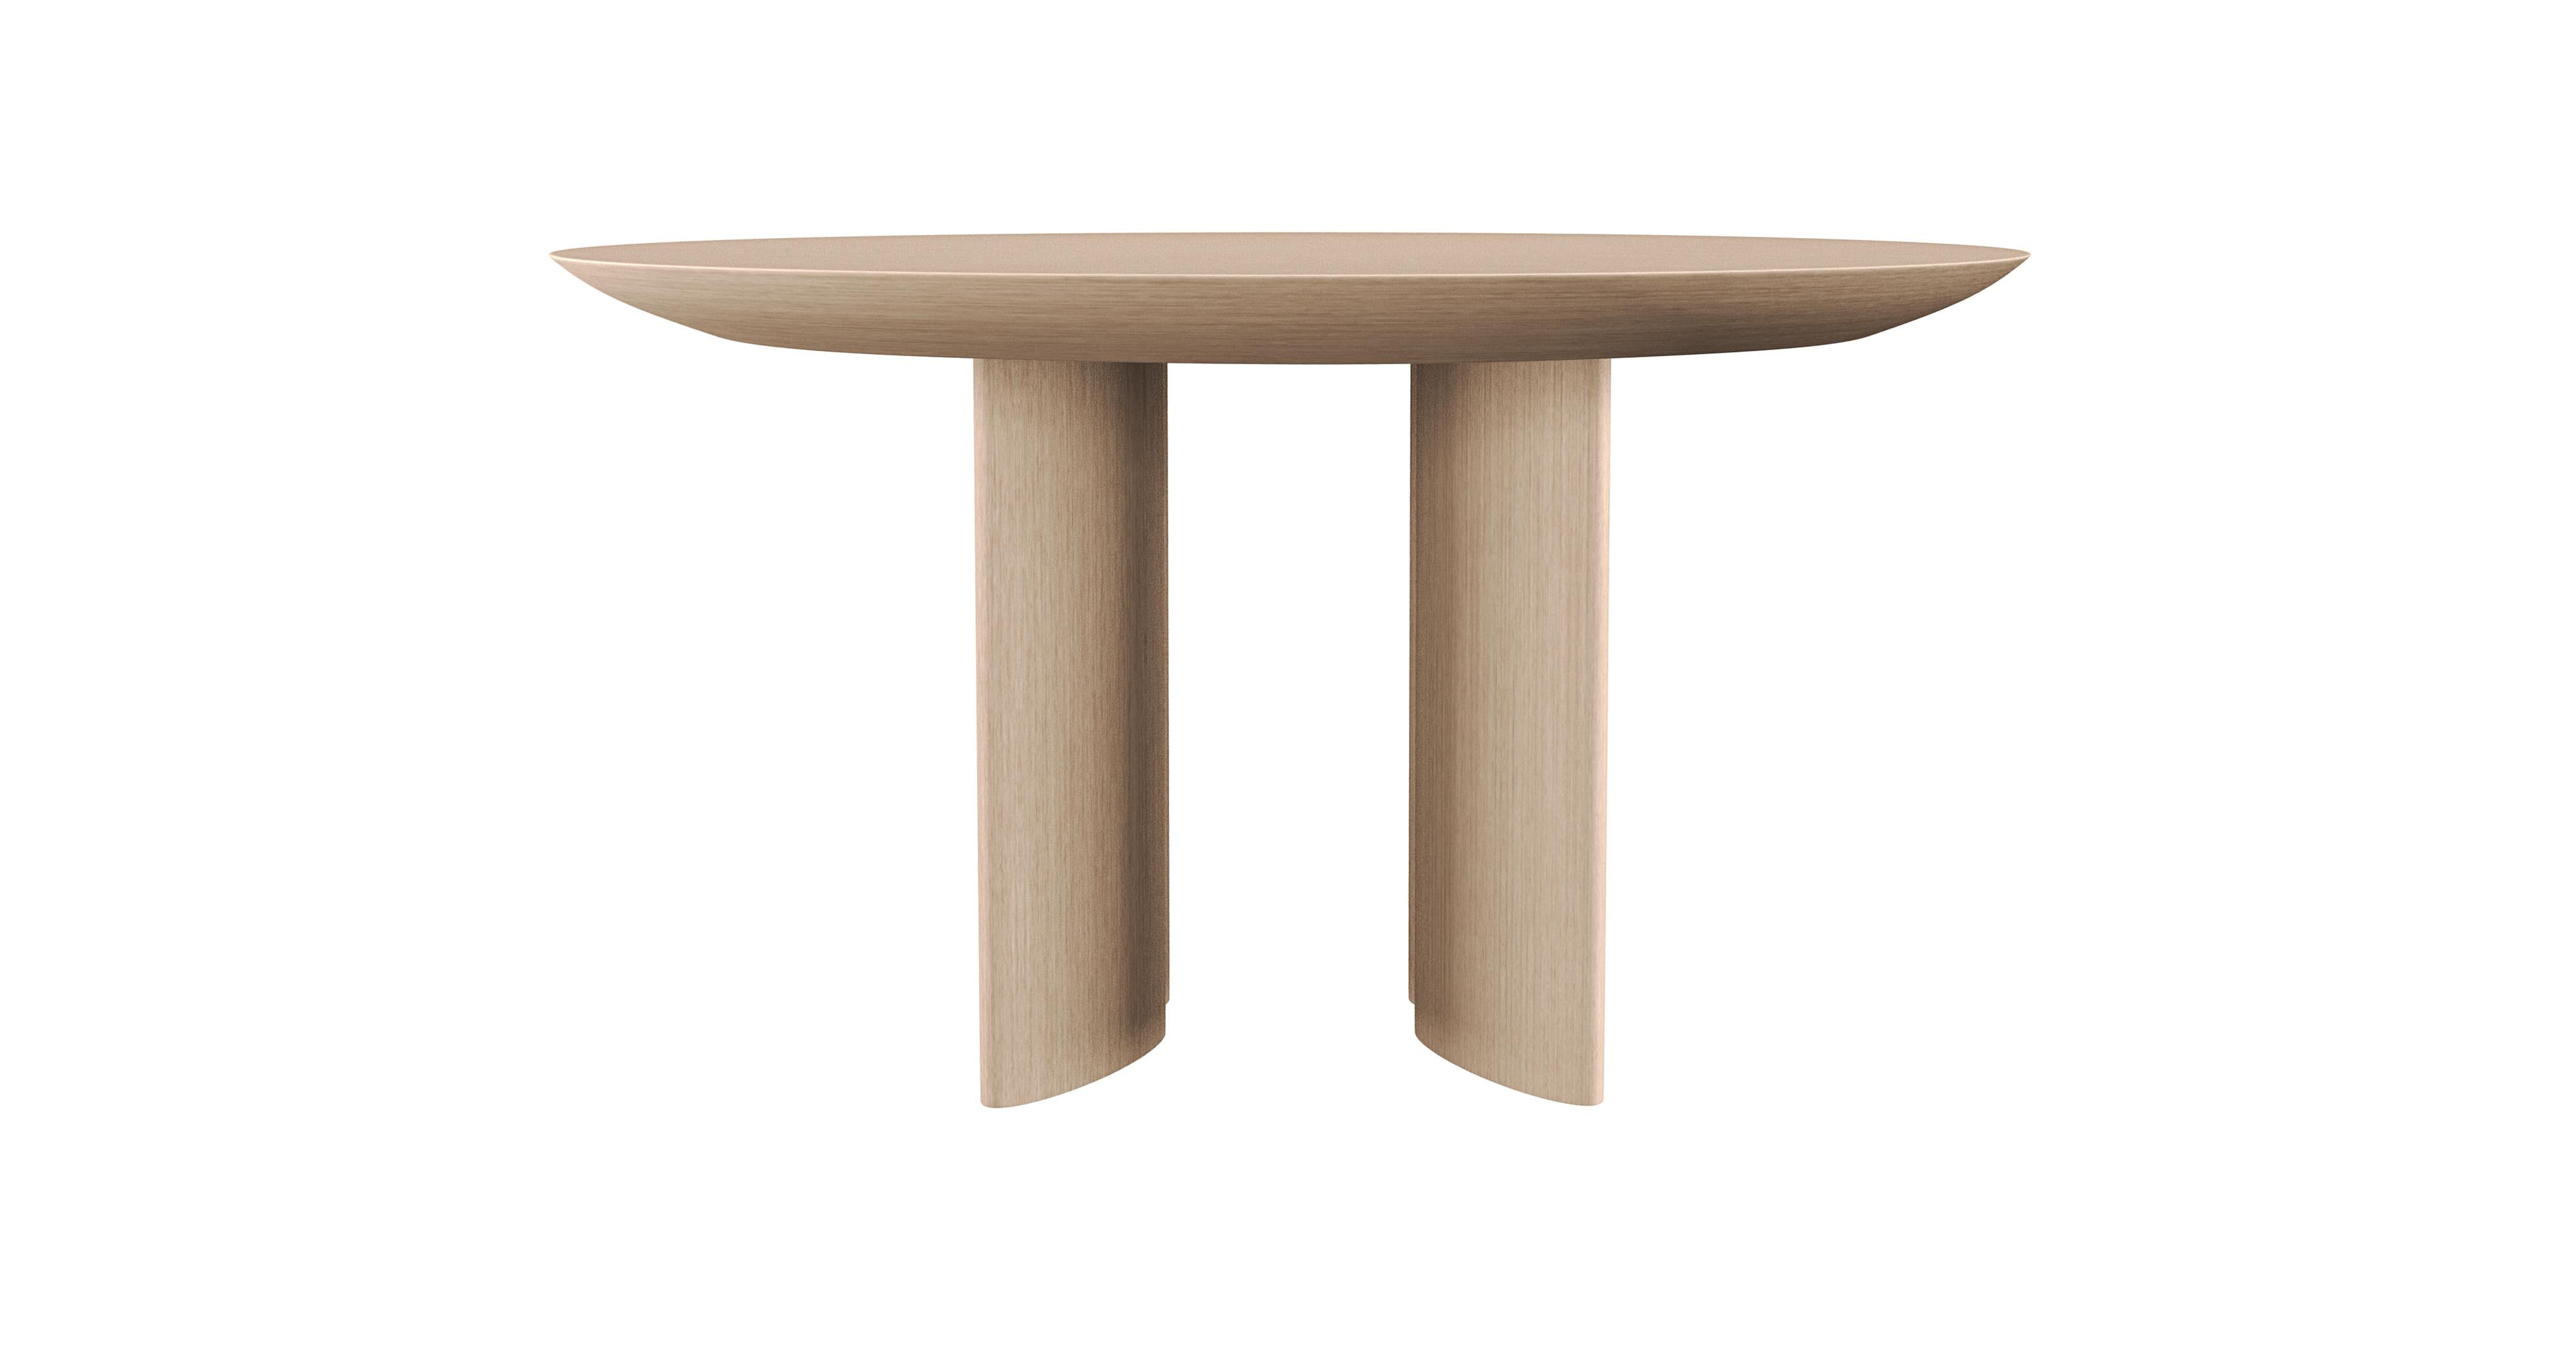 TORII

Inspired by the Japanese sacred portals of the same name, Torii is a solid wood table veneered in bleached oak. Handmade in Italy. 

It represents a modern transition between the sacred and the profane: the sacredness of conviviality at the